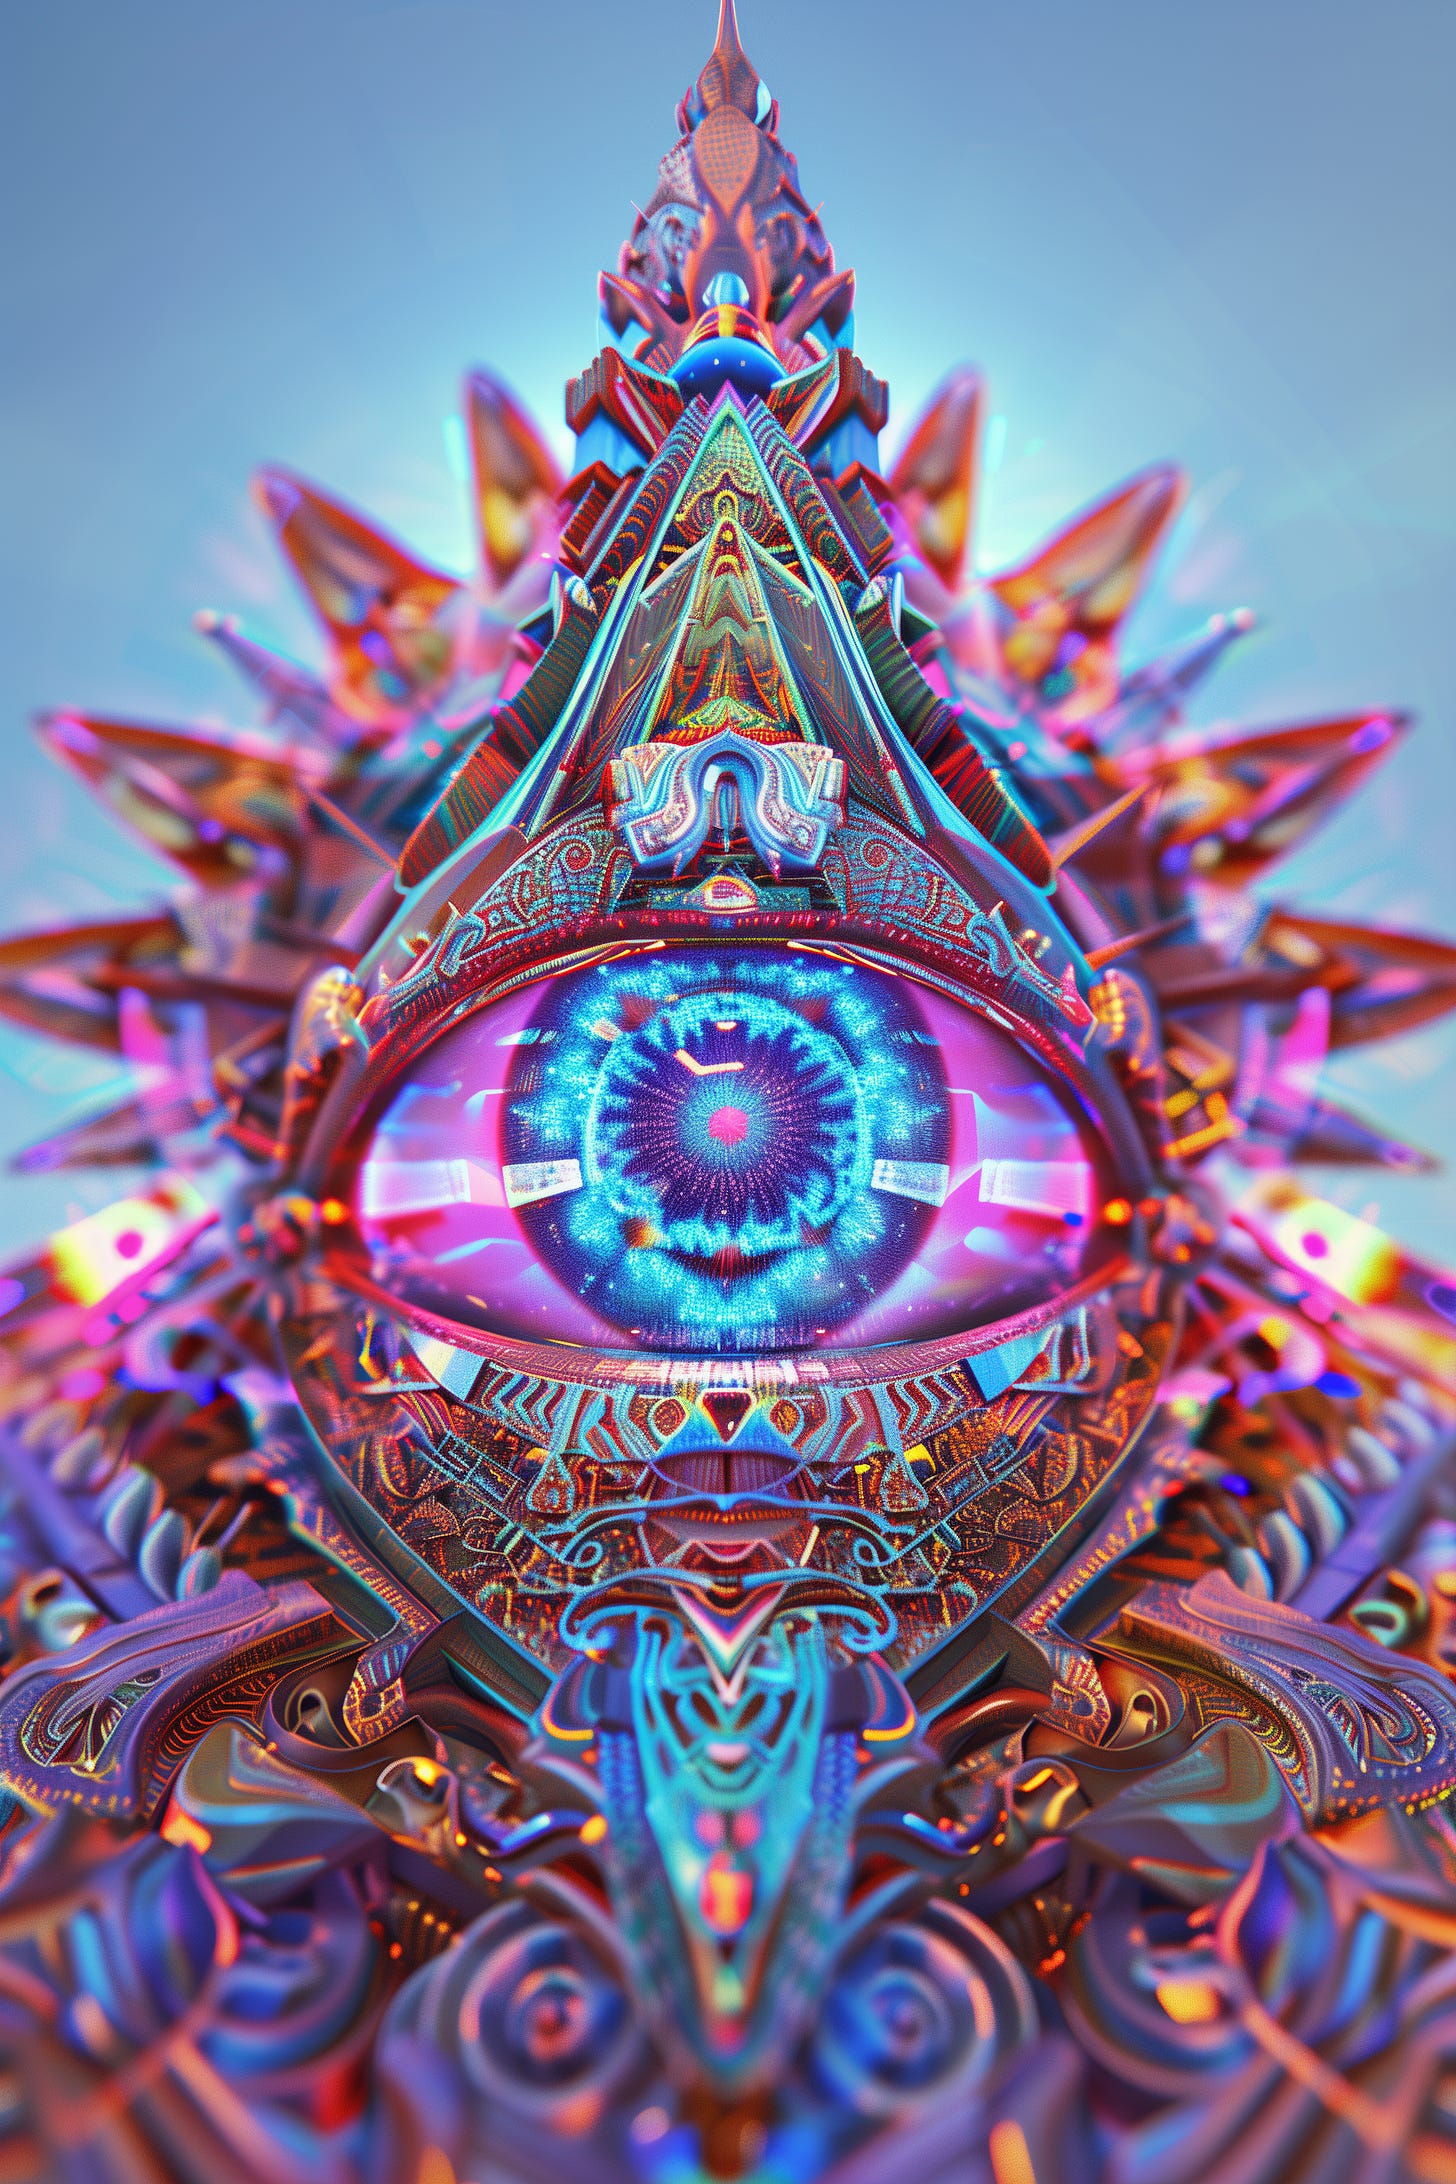 A colourful geometric psychedelic vision of an otherworldly machine with an all-seeing eye embedded within